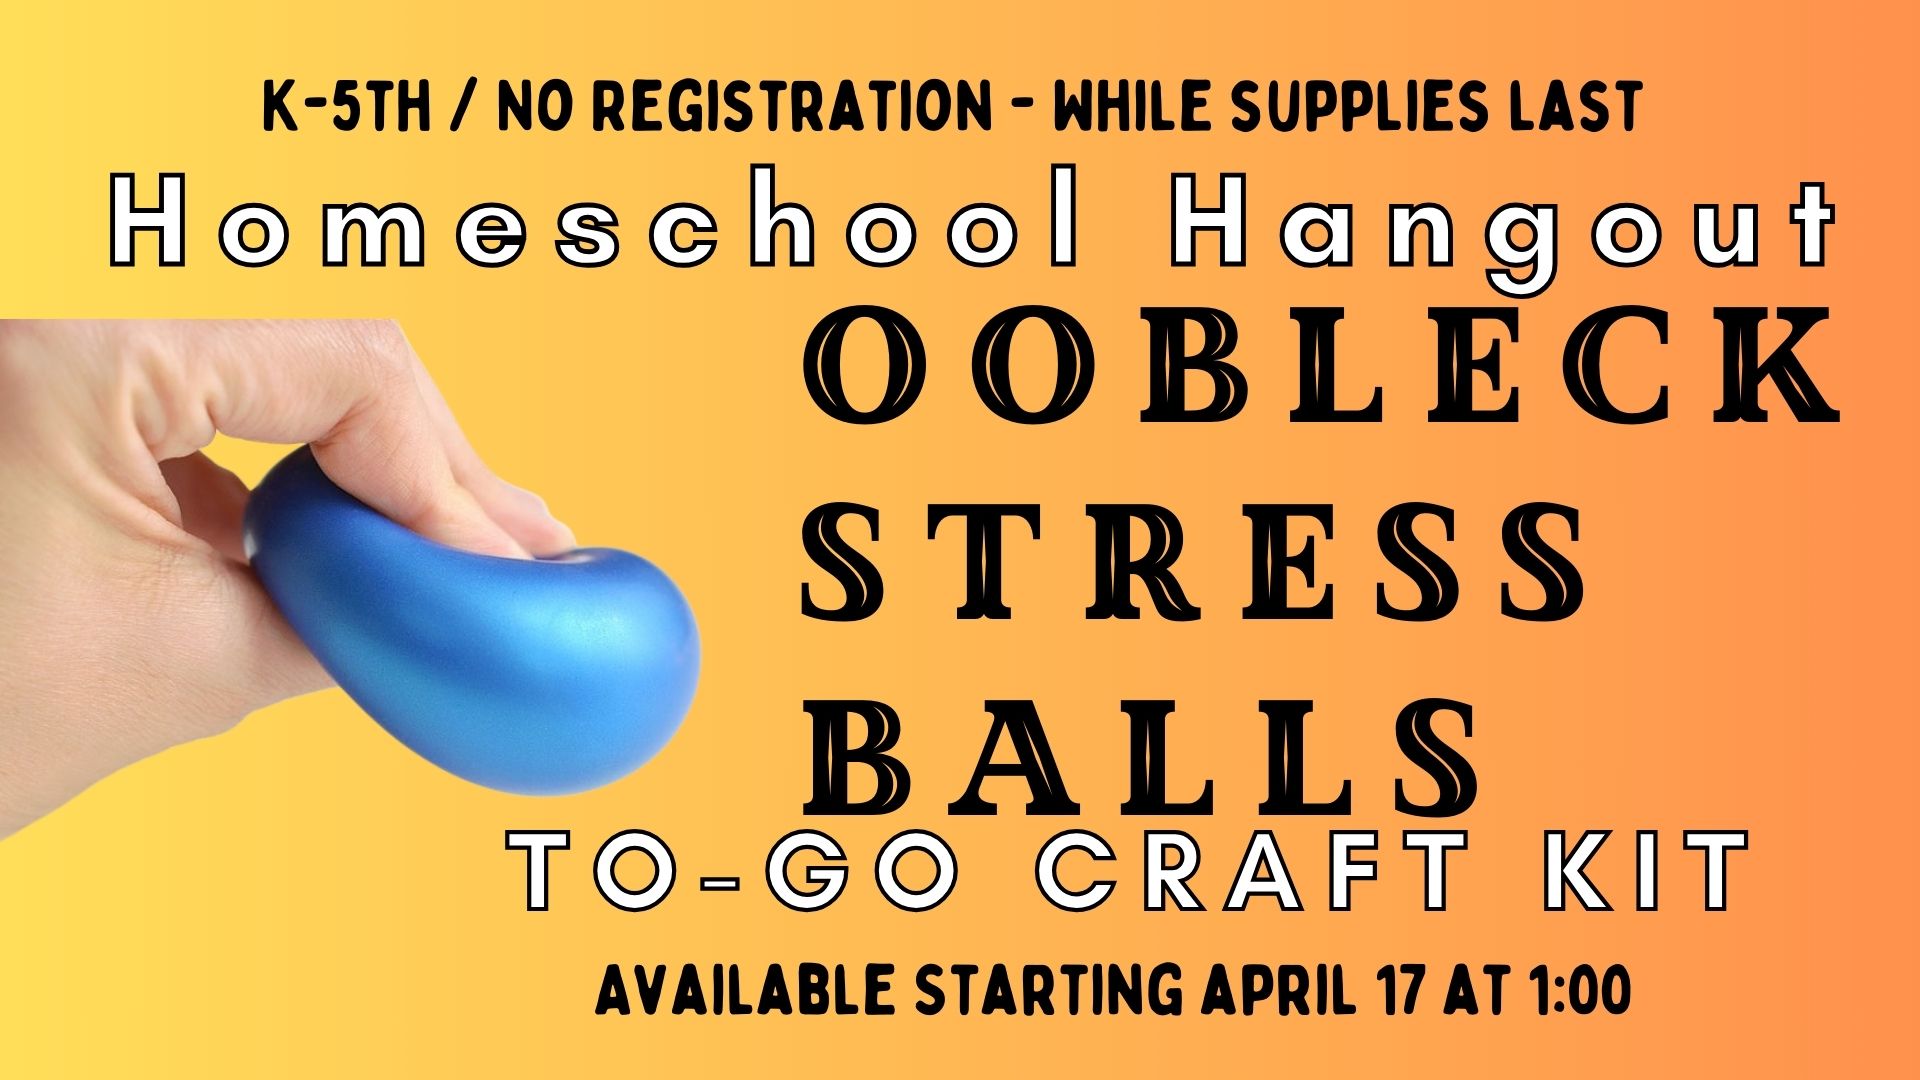 K-5th/No Registration- While Supplies Last.  Homeschool Hangout To Go Craft Kit.   Oobleck Stress Balls.   Available Starting April 17 at 1:00